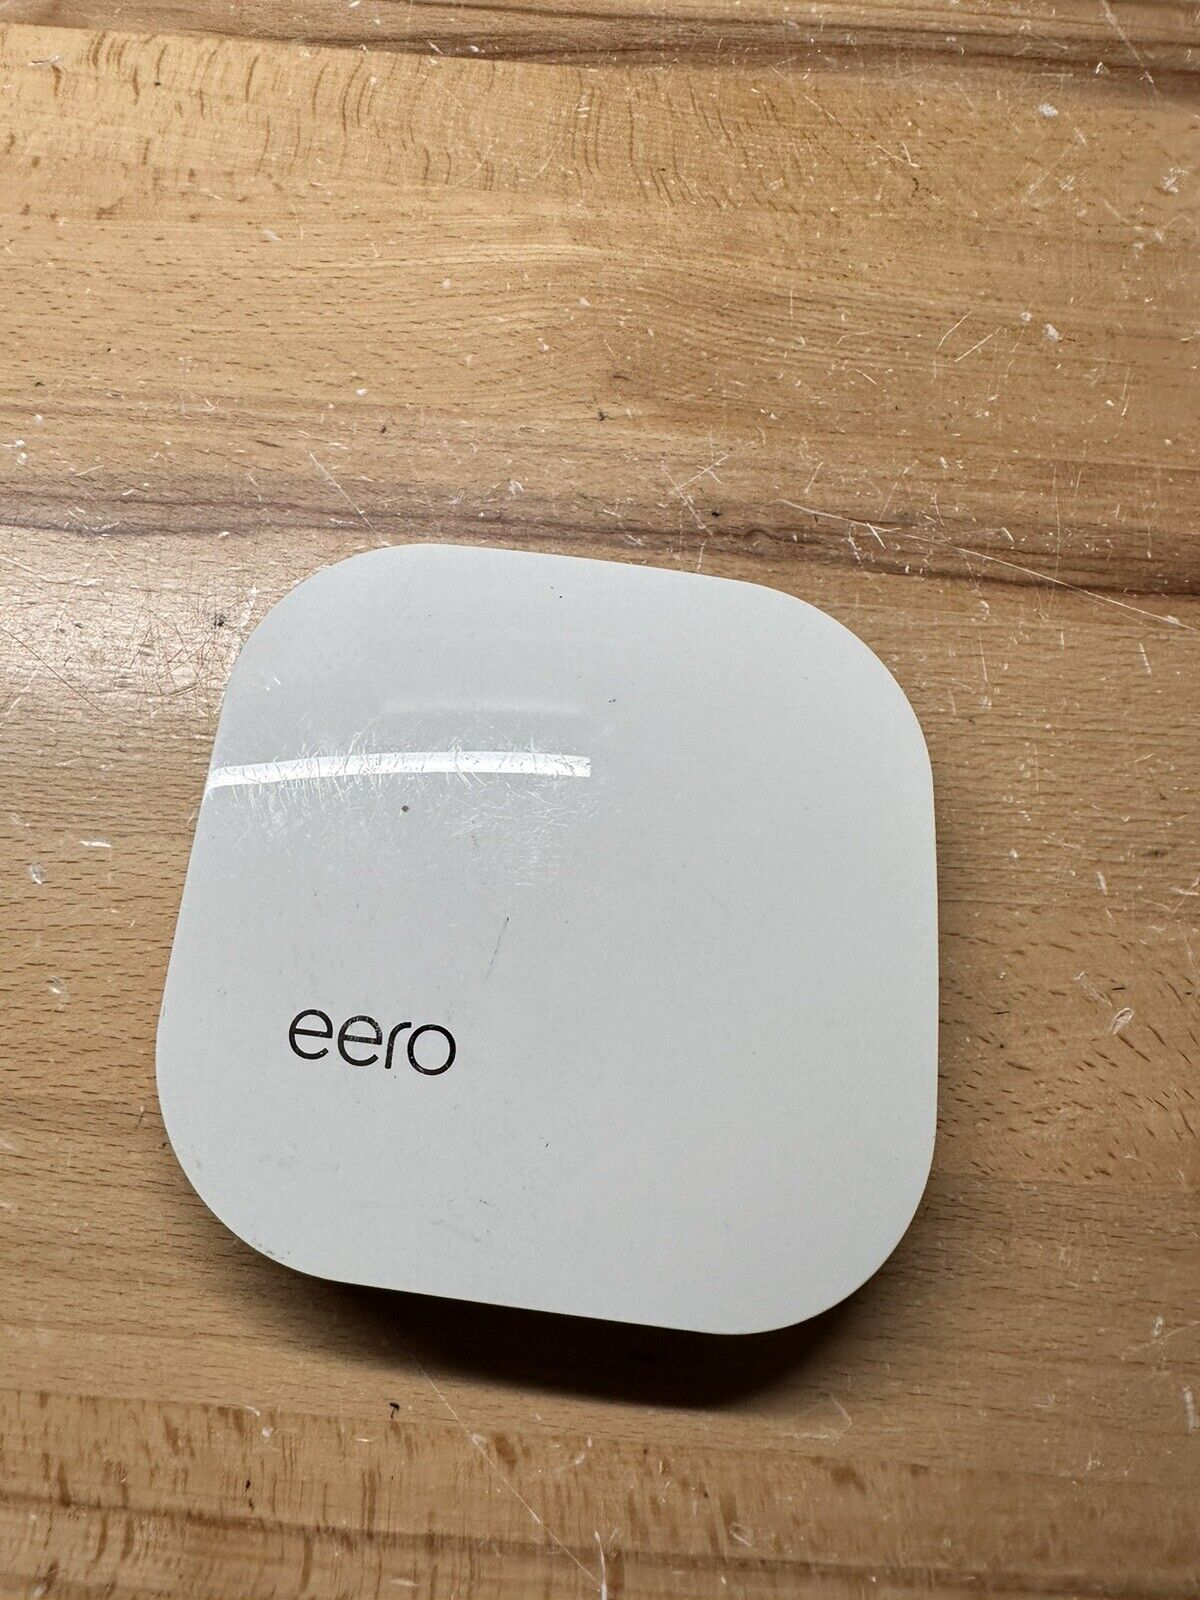 (i) Eero A010001 1st Generation Dual Band Wi-Fi Router (NO POWER CORD)